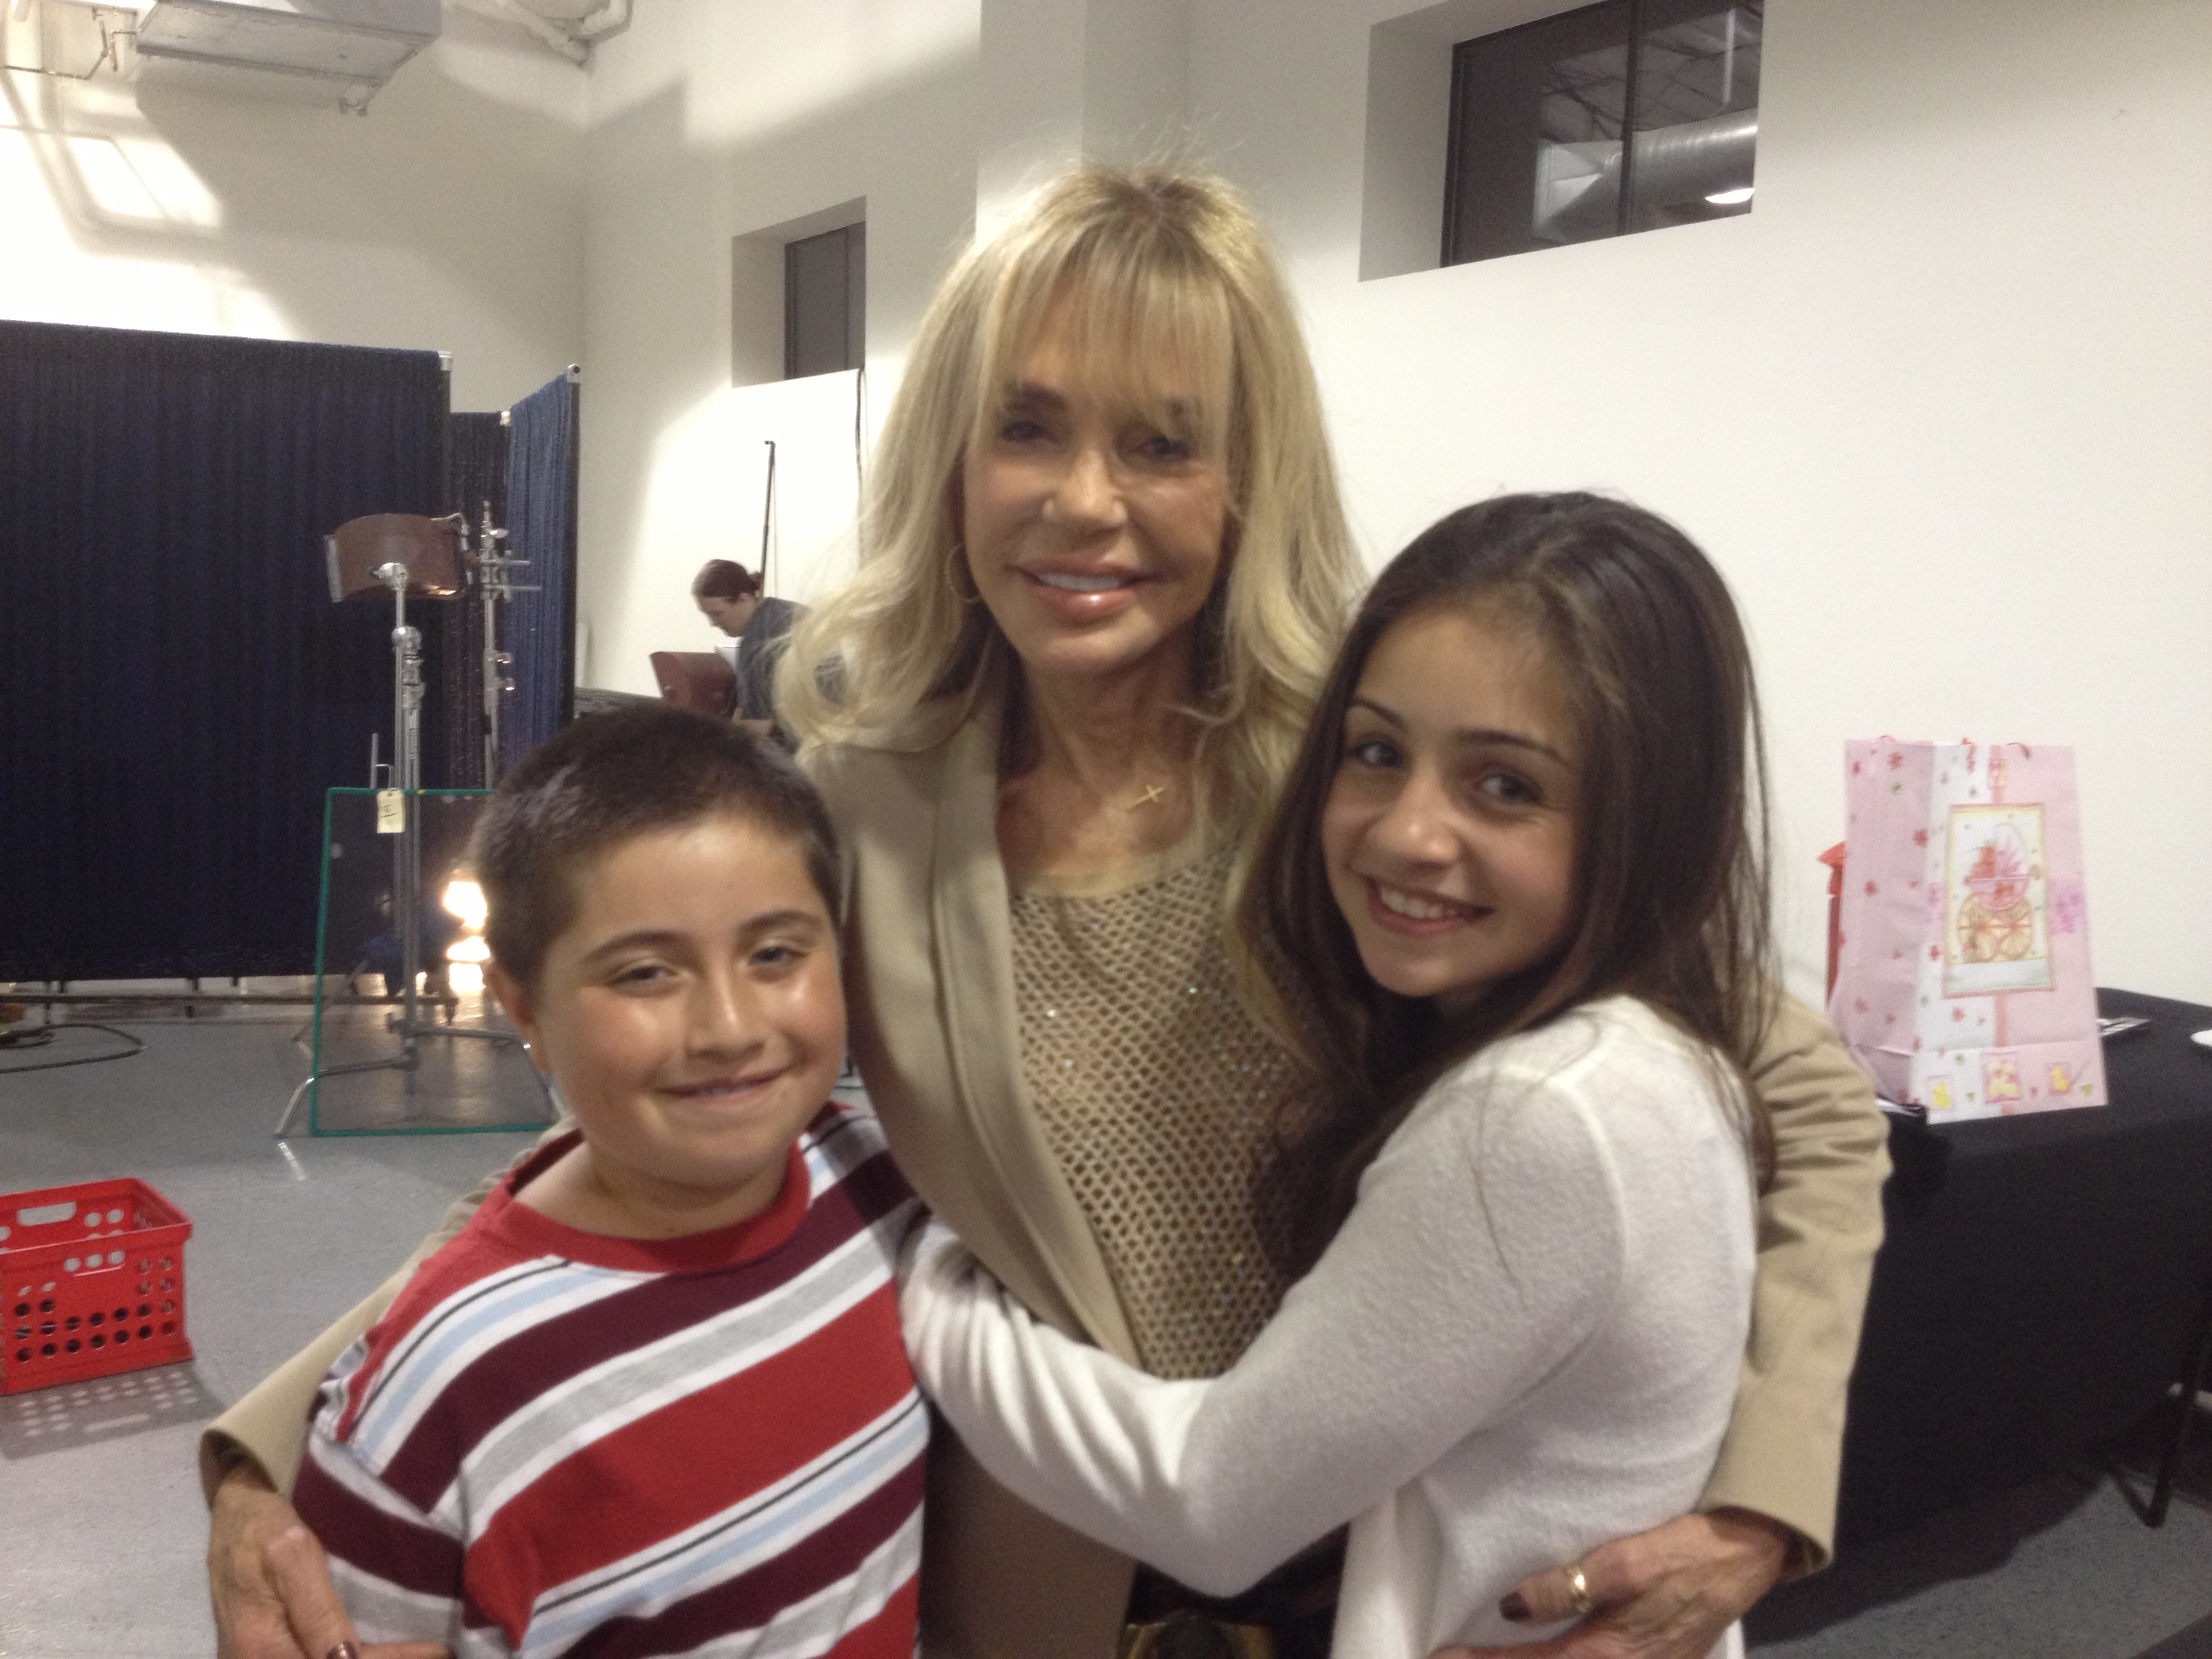 Christian on the set of 'Get Your Luv On' with Dyan Cannon (Actress & Director) and with his sister, Samantha Elizondo.